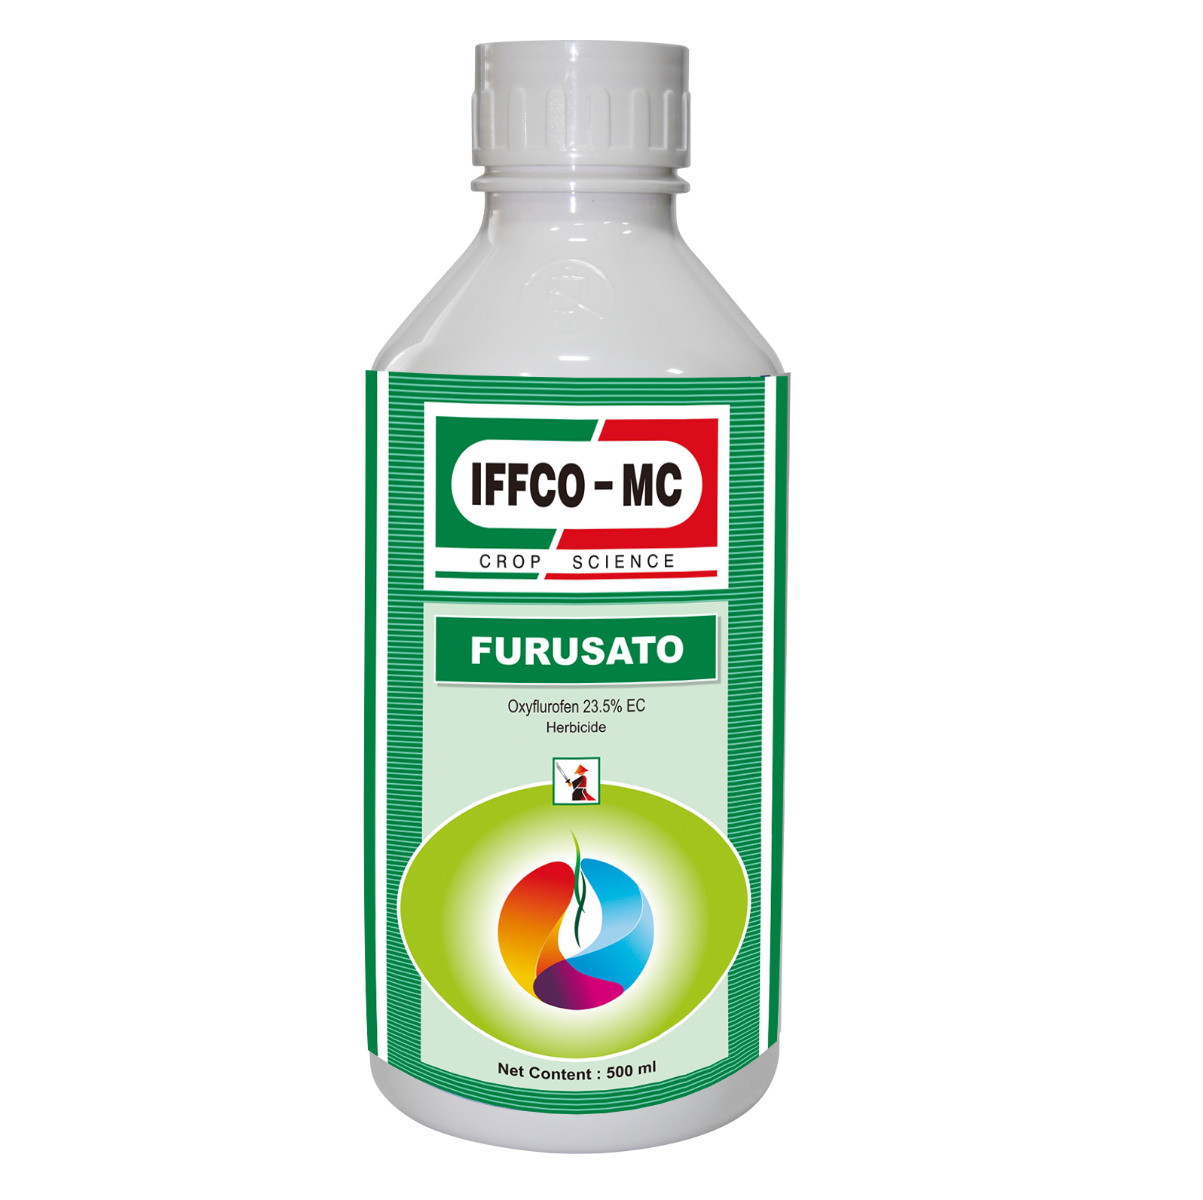 Roofon Insecticide Supplier,Wholesale Roofon Insecticide Supplier from  Kutch India